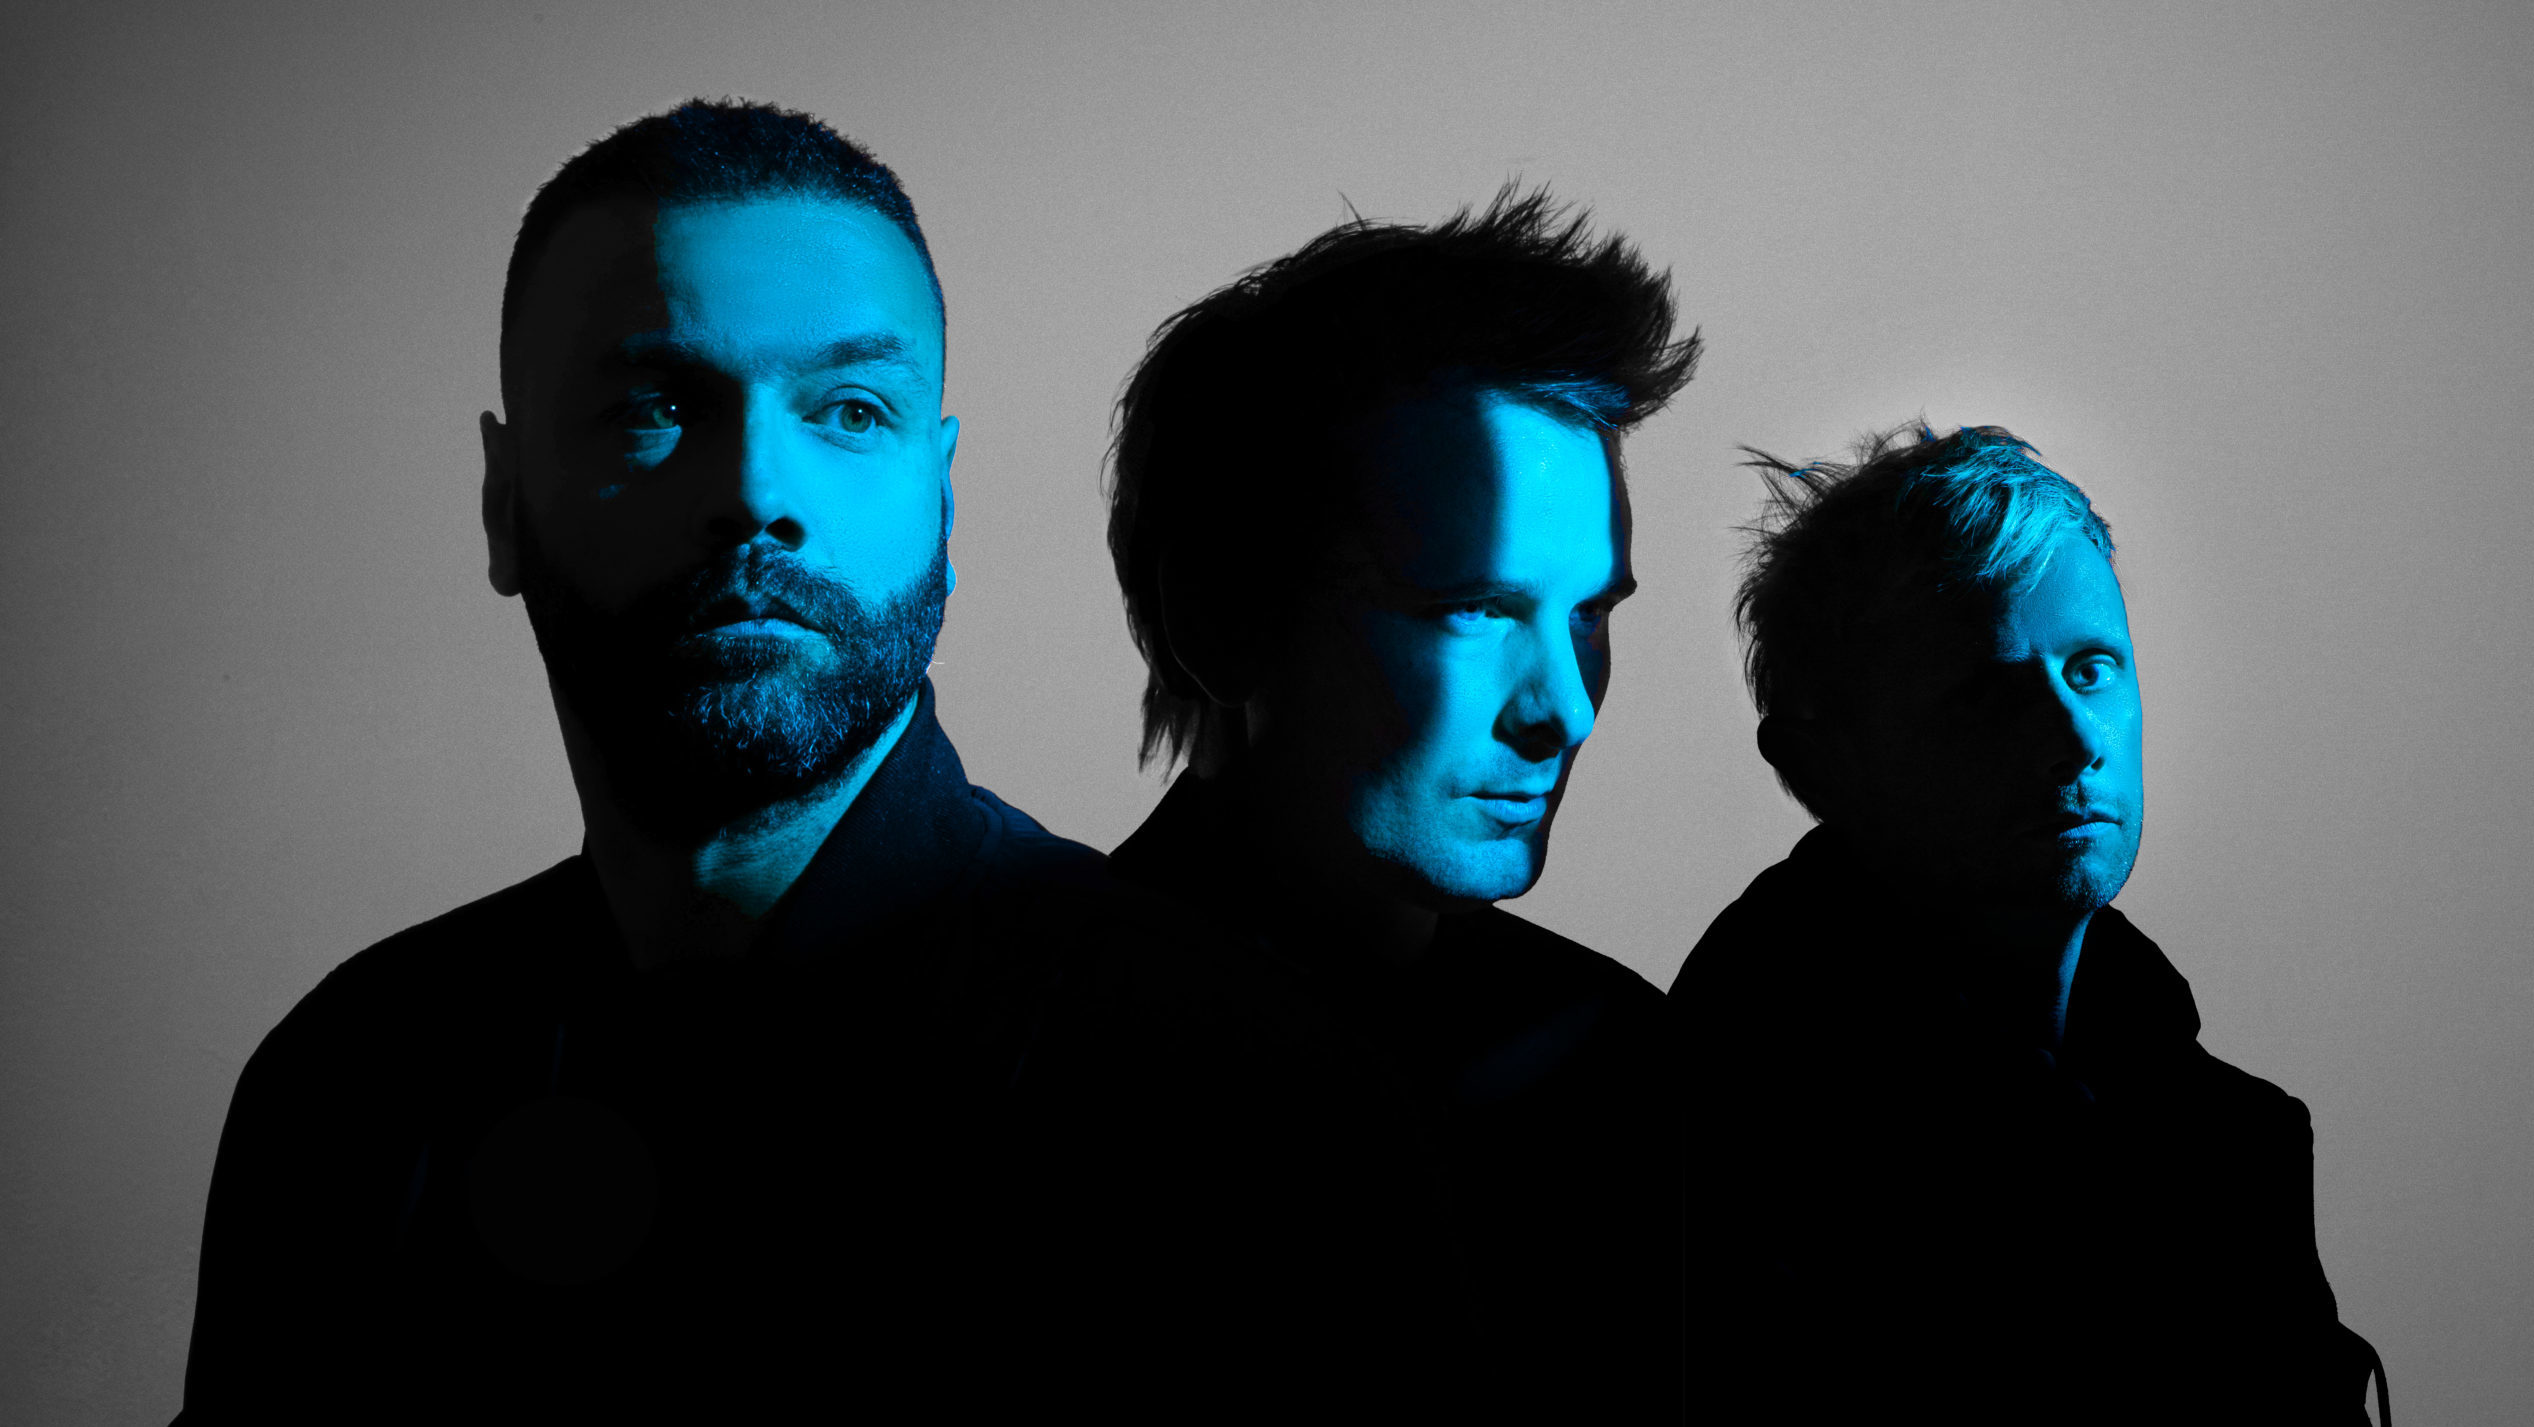 Muse's Matt Bellamy, Chris Wolstenholme, Dominic Howard stand in darkness except for blue light reflected from their faces